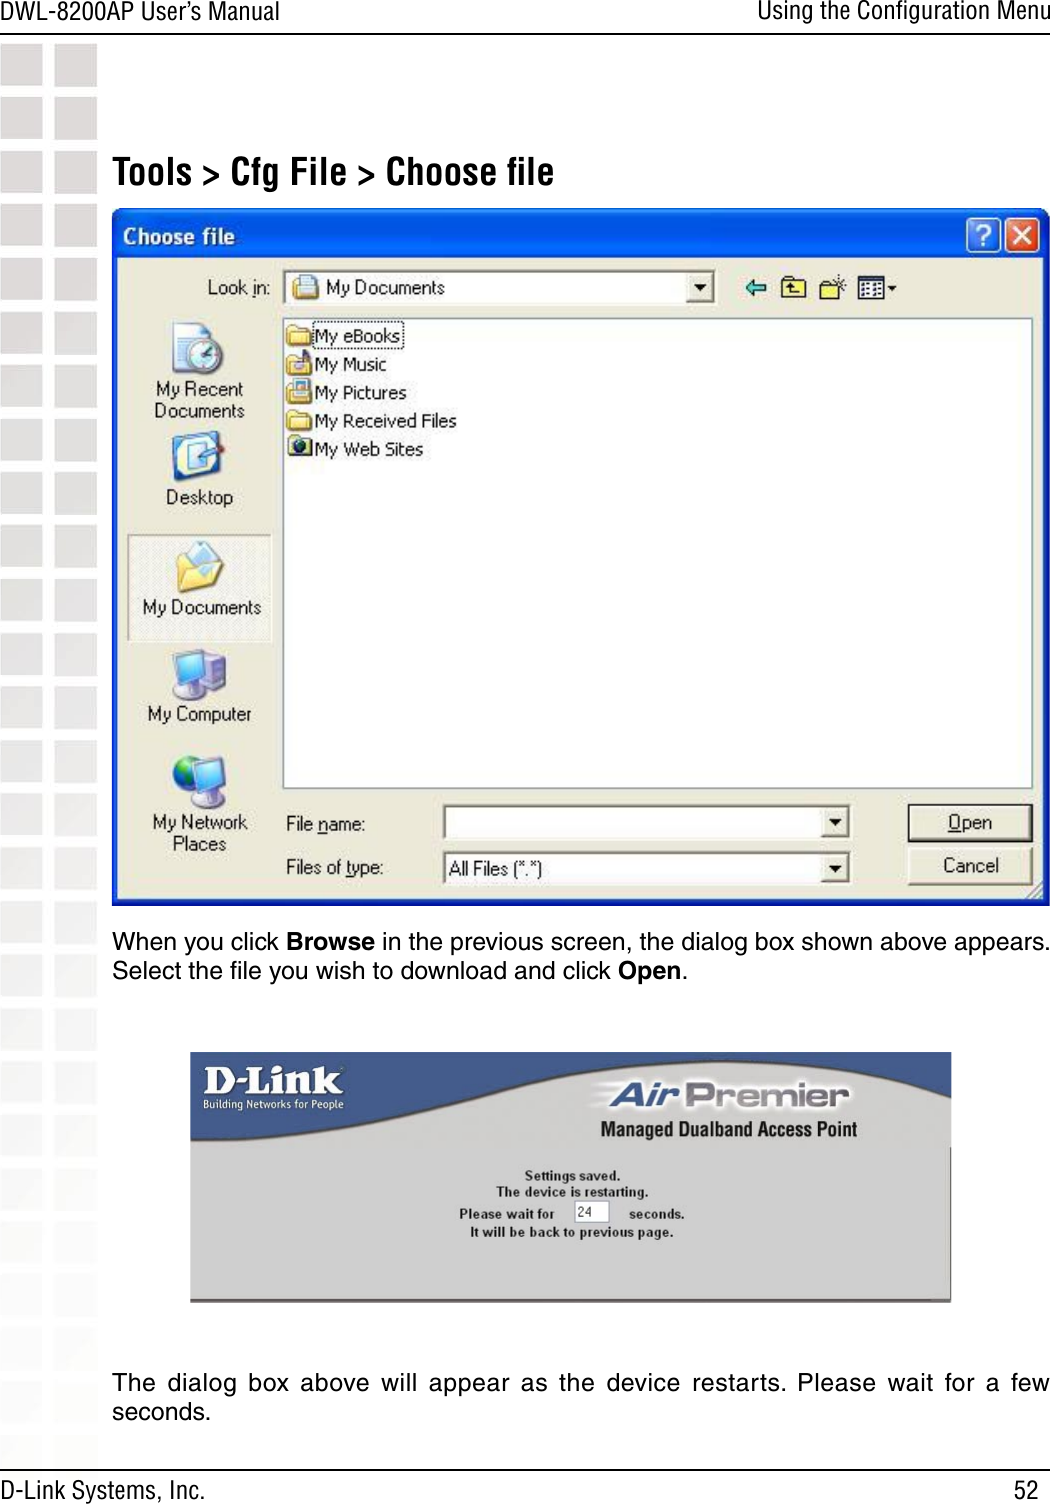 52DWL-8200AP User’s ManualD-Link Systems, Inc.Using the Conﬁguration MenuTools &gt; Cfg File &gt; Choose ﬁle When you click Browse in the previous screen, the dialog box shown above appears.Select the ﬁle you wish to download and click Open. The  dialog  box  above  will  appear  as  the  device  restarts.  Please  wait  for  a  few seconds.